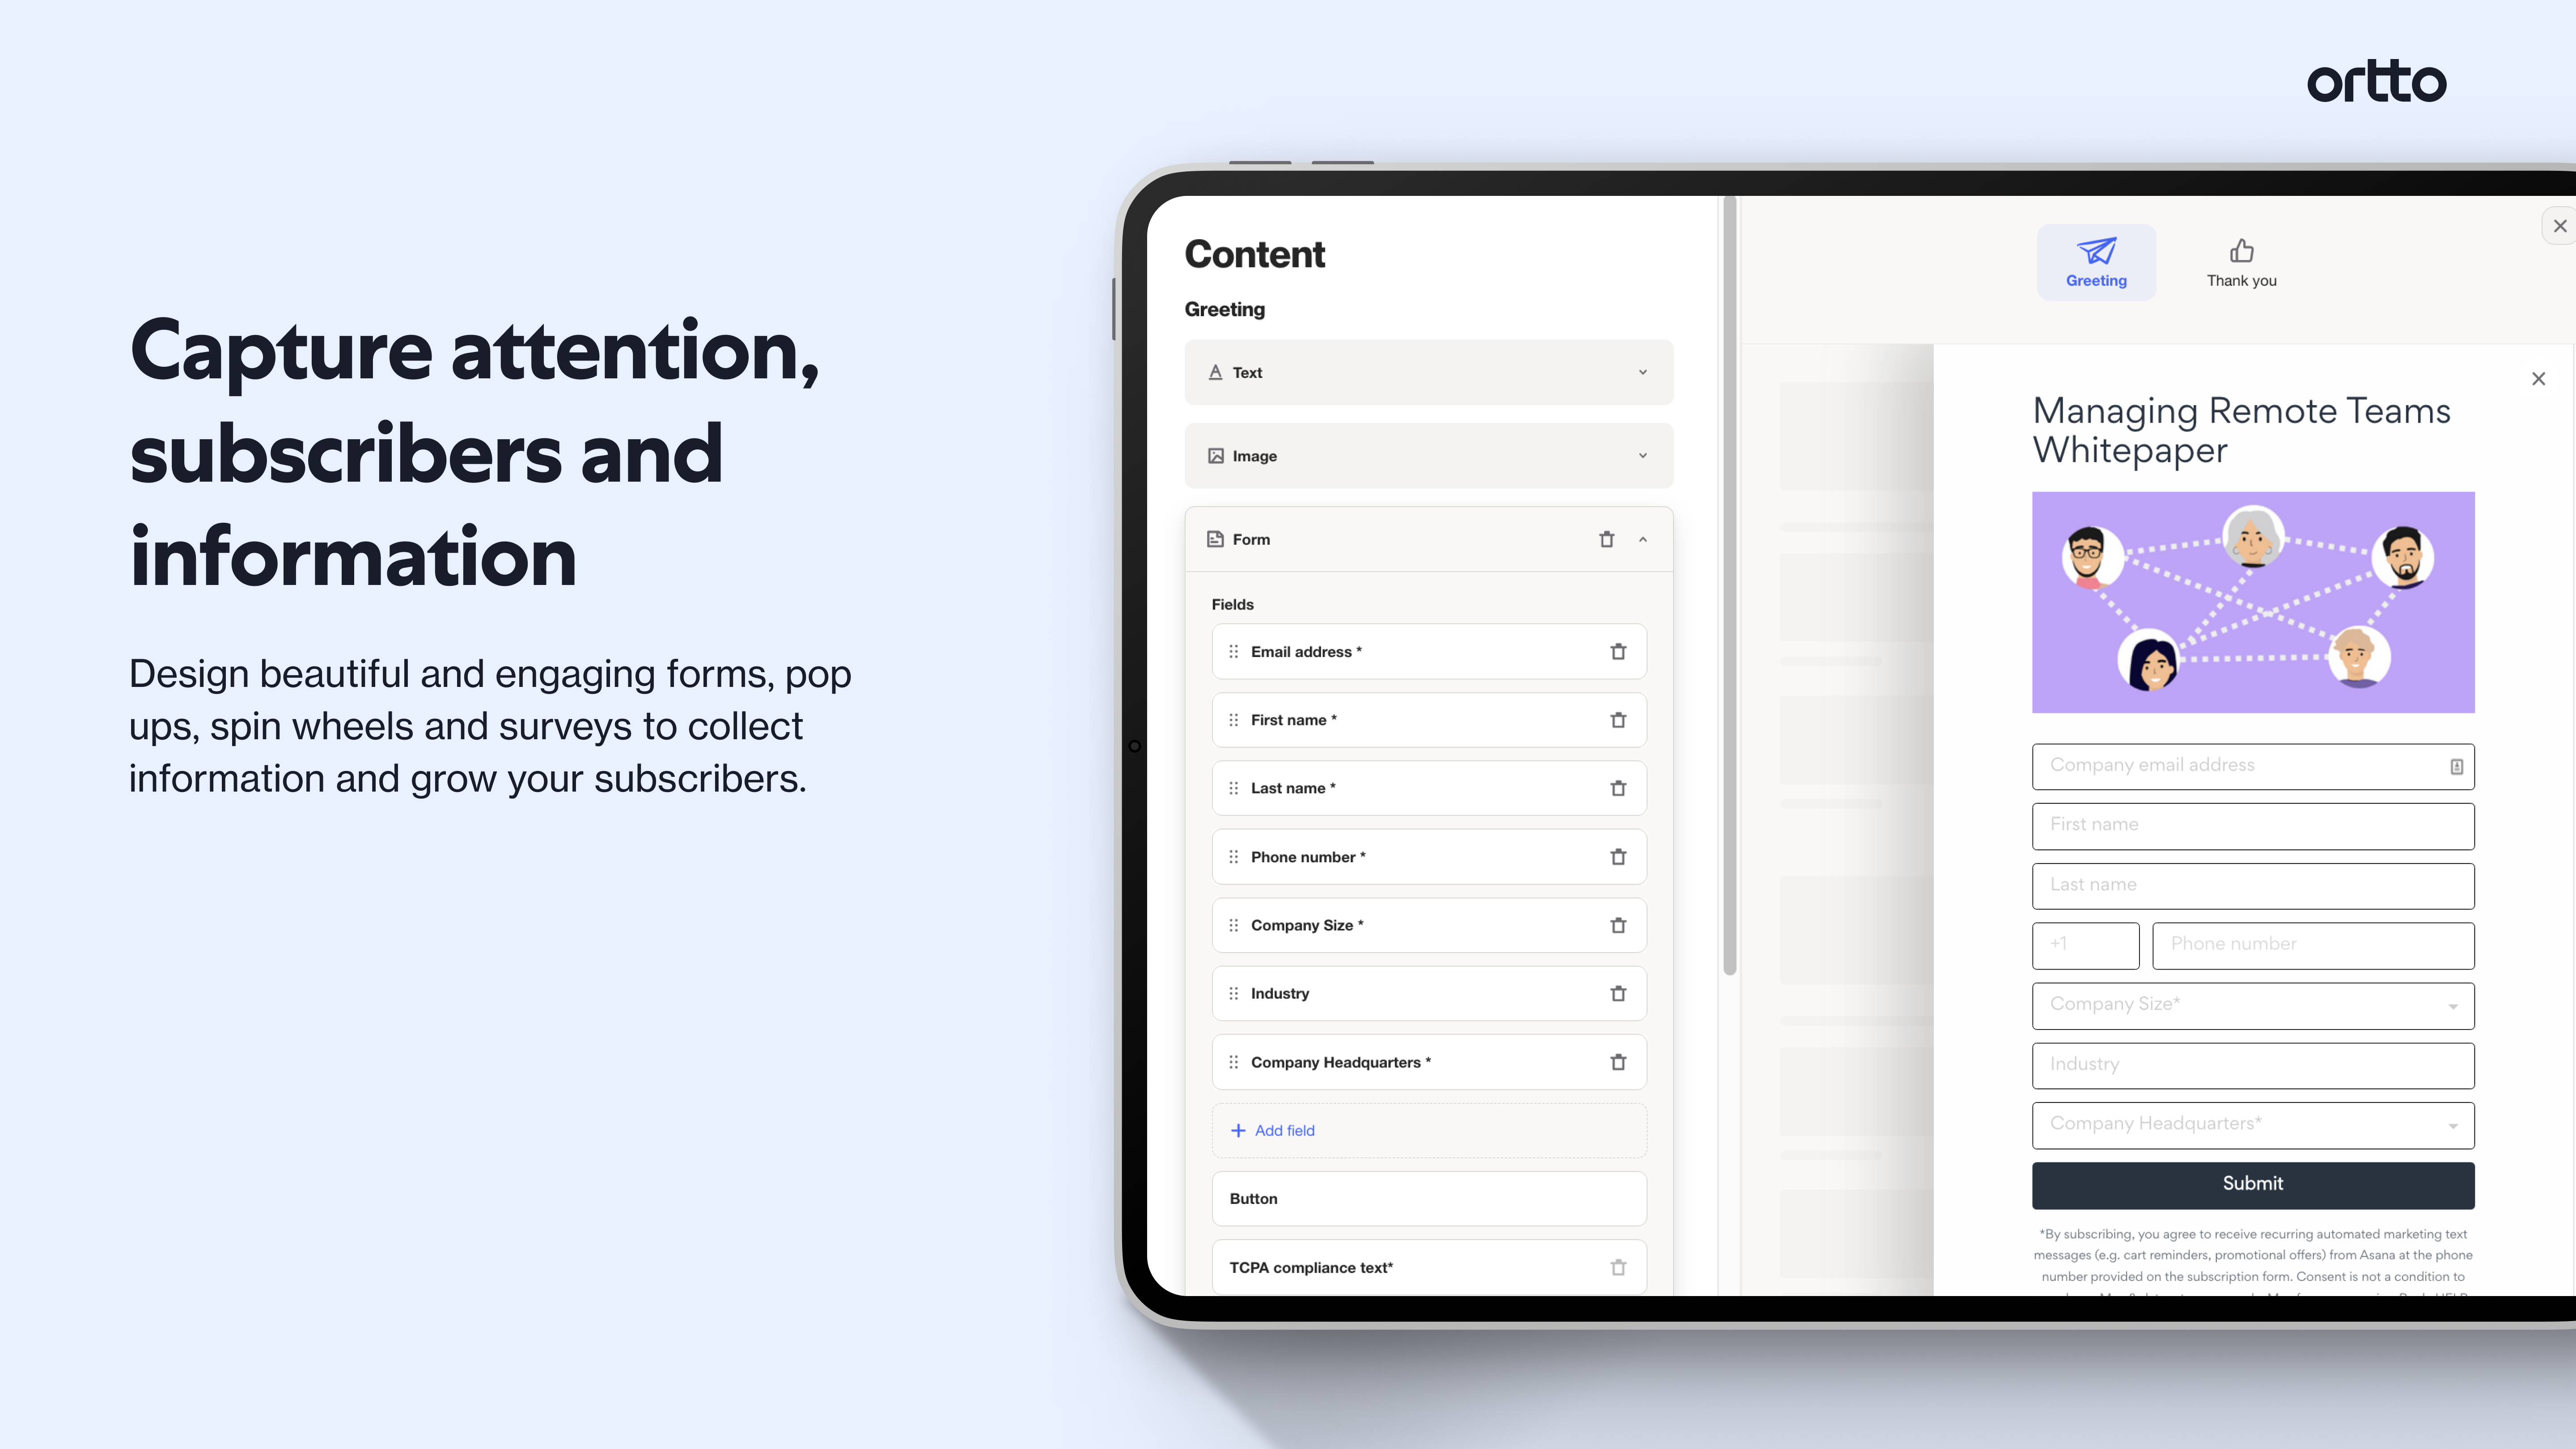 Ortto allows you to create pop-ups, forms, bars, notifications, screen takeovers, banners, reactions, spin wheels, surveys, videos, countdowns and collect feedback. Contacts captured from tracked forms can be added to customer journeys.